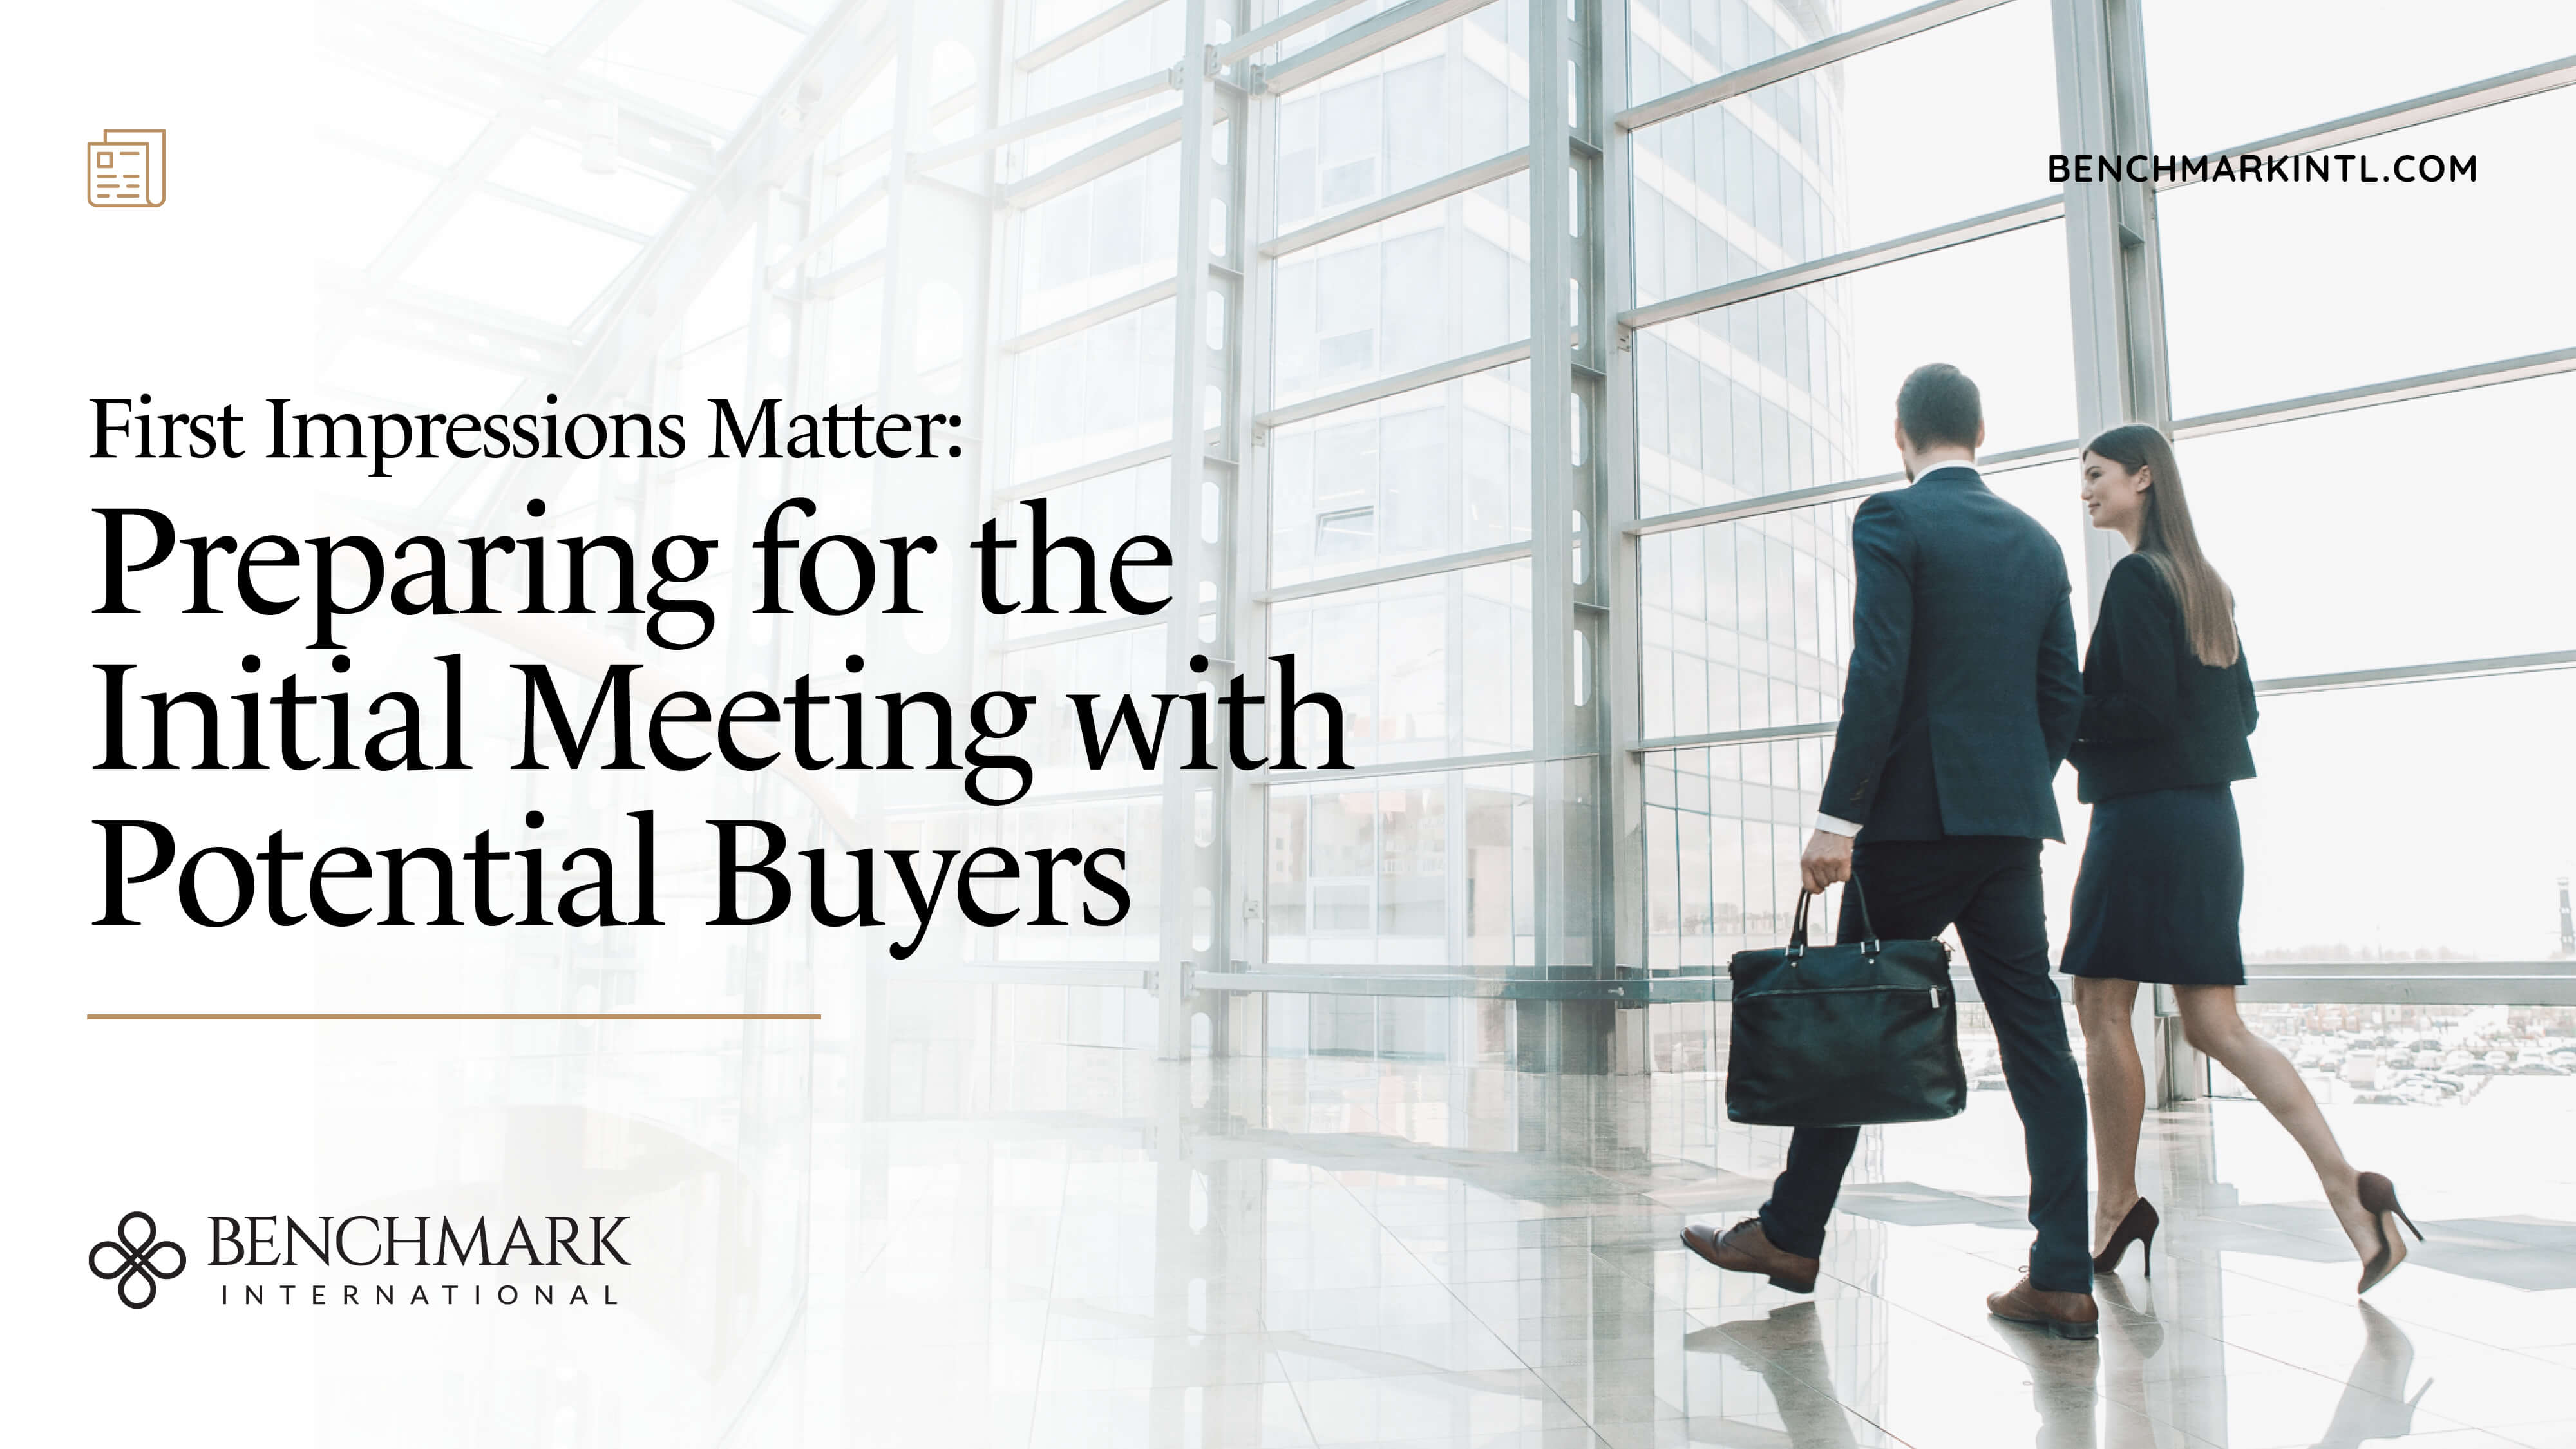 First Impressions Matter: Preparing for the Initial Meeting with Potential Buyers